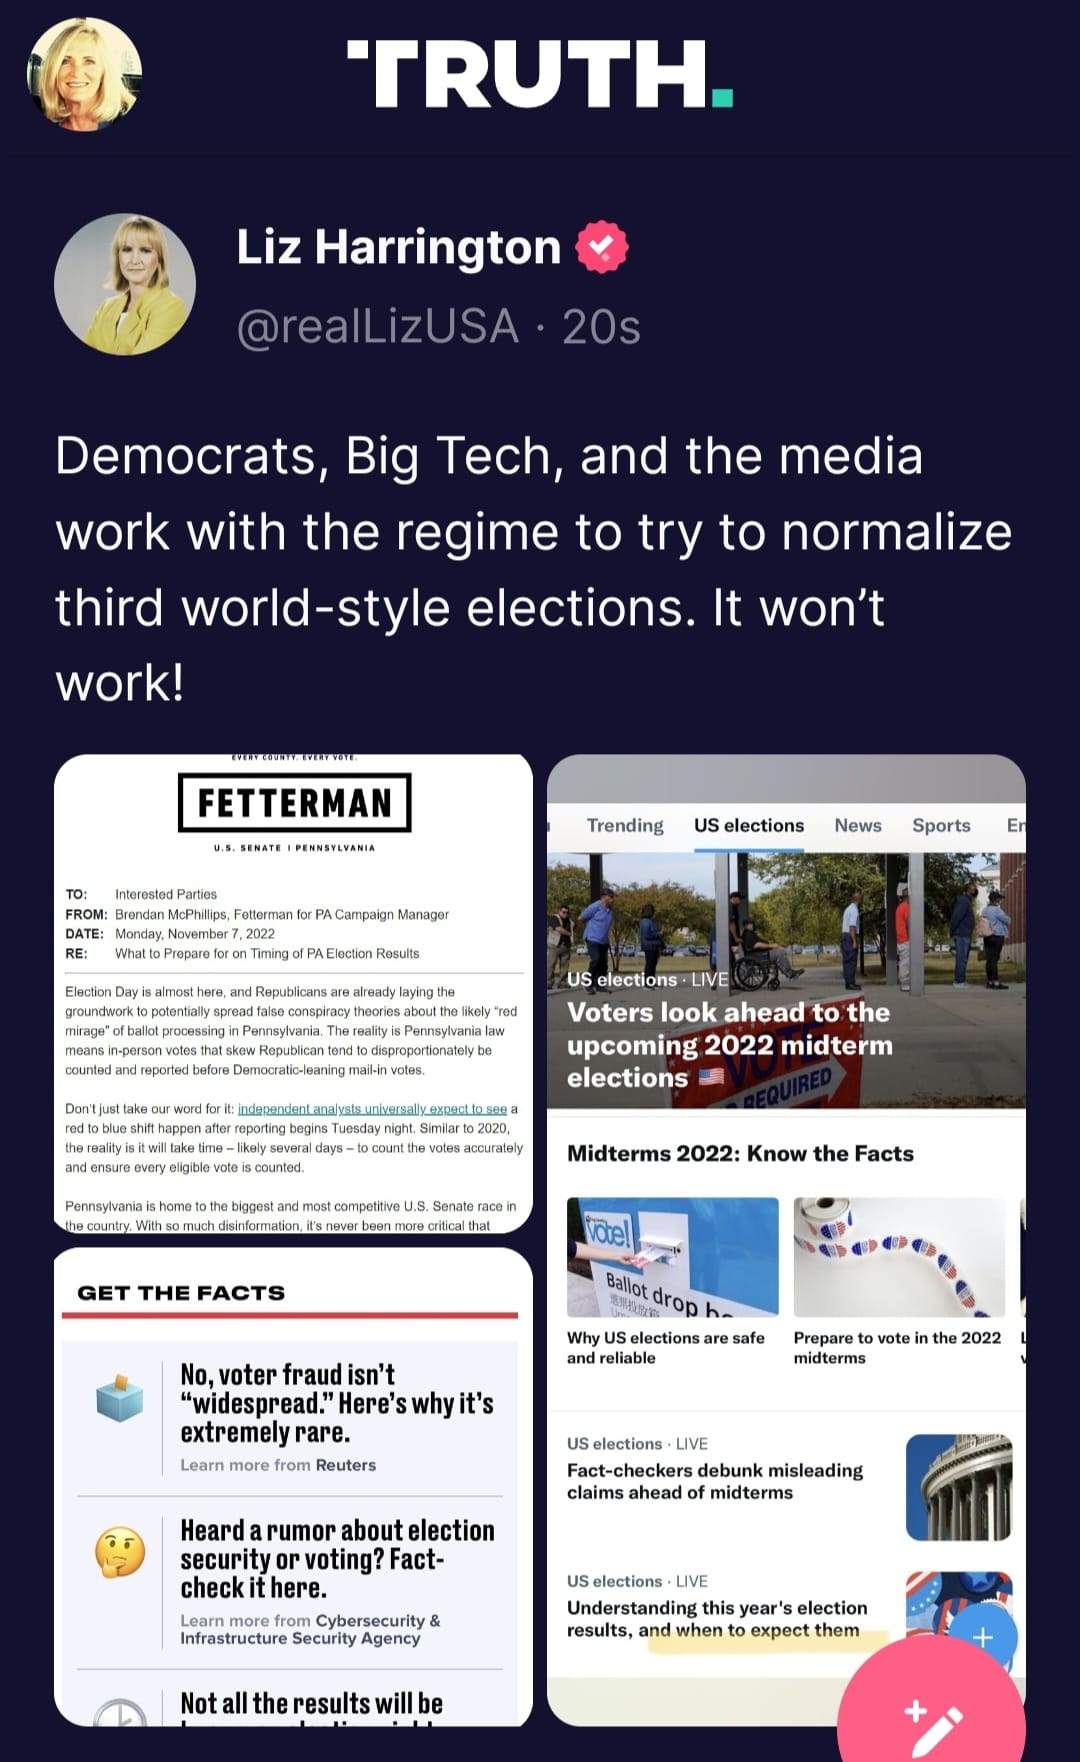 May be an image of 7 people and text that says 'TRUTH. Liz Harrington @realLizUSA 20s Democrats, Big Tech, and the media work with the regime to try to normalize third world-style elections. It won't work! FETTERMAN Trending US elections News Manager Sports elections Voters look ahead to the upcoming 2022 midterm elections Midterms 2022: Know the Facts GET FACTS elections and eliable No, voter fraud isn't "widespread." Here's extremely rare. more from Reuters safe Prepare vote 2022 USelections claims Heard rumor about lection security voting? Fact- checkithere. checki misleading Security Selections Understanding election results, when to expect results'